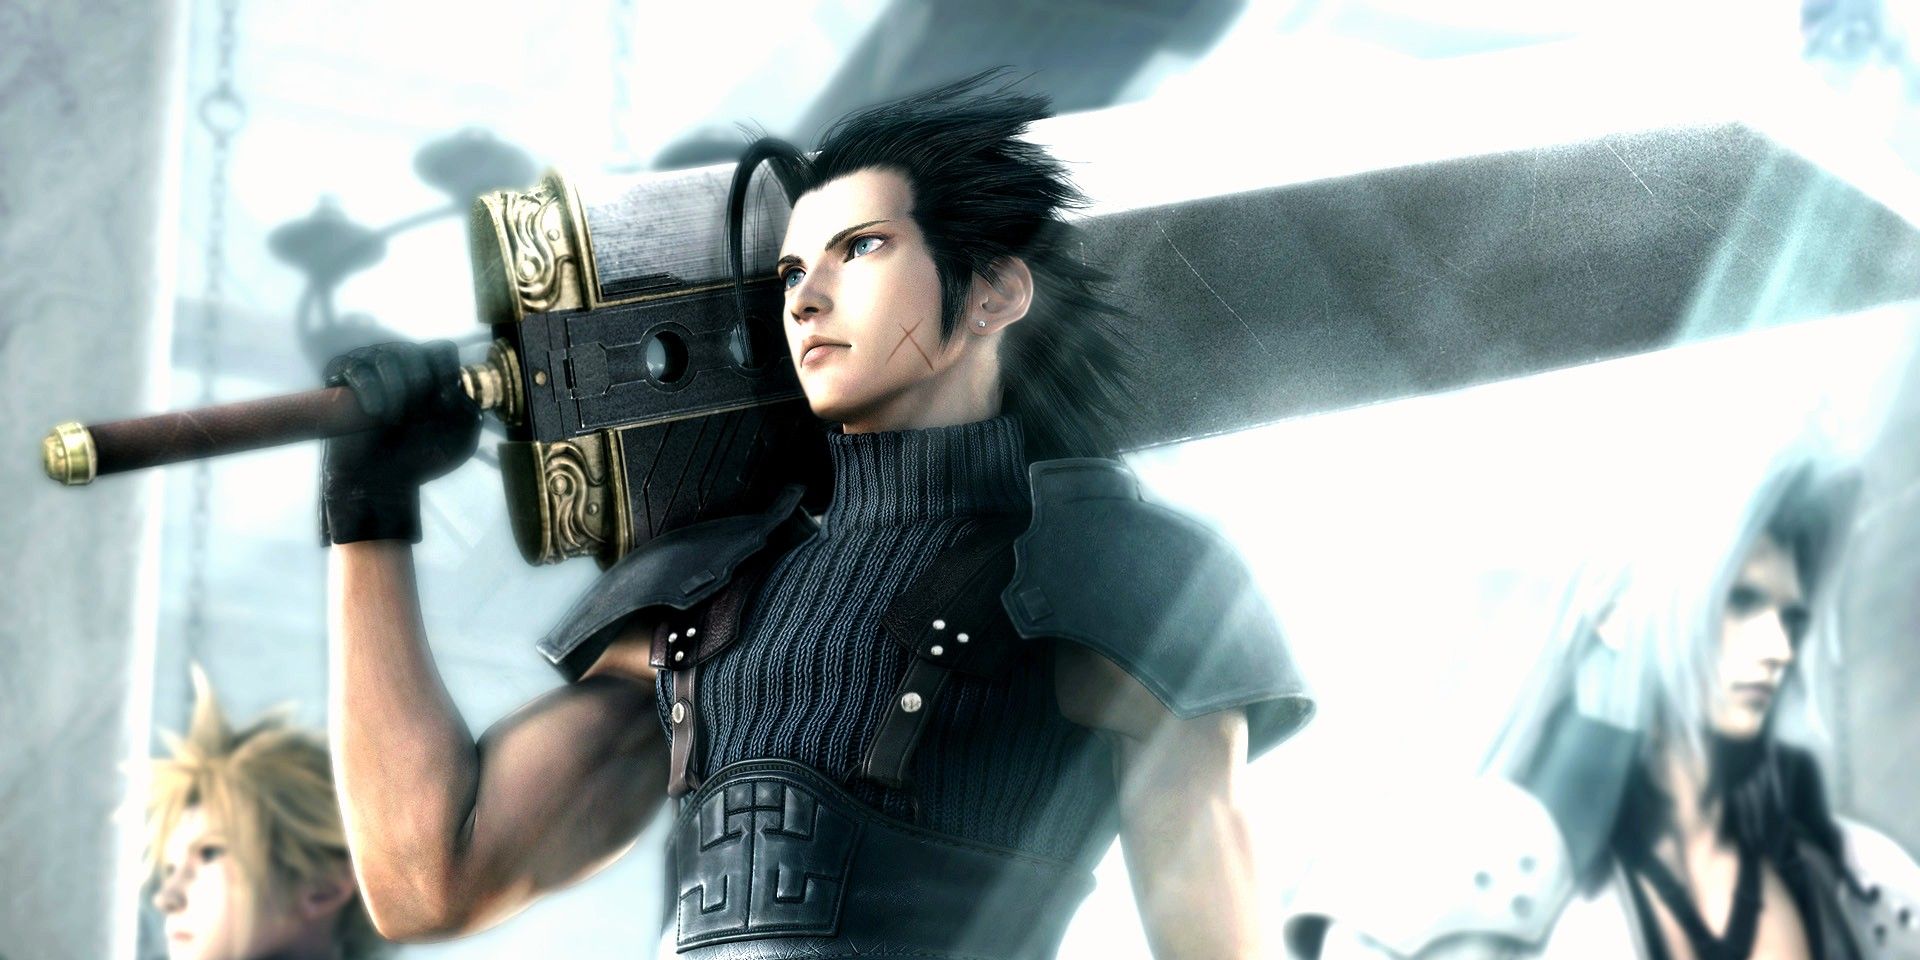 Crisis Core: Final Fantasy 7 Reunion's protagonist Zack Fair holding the huge Buster Sword on his shoulder while Cloud and Sephiroth can be seen in the bright, nondescript background to either side of him.